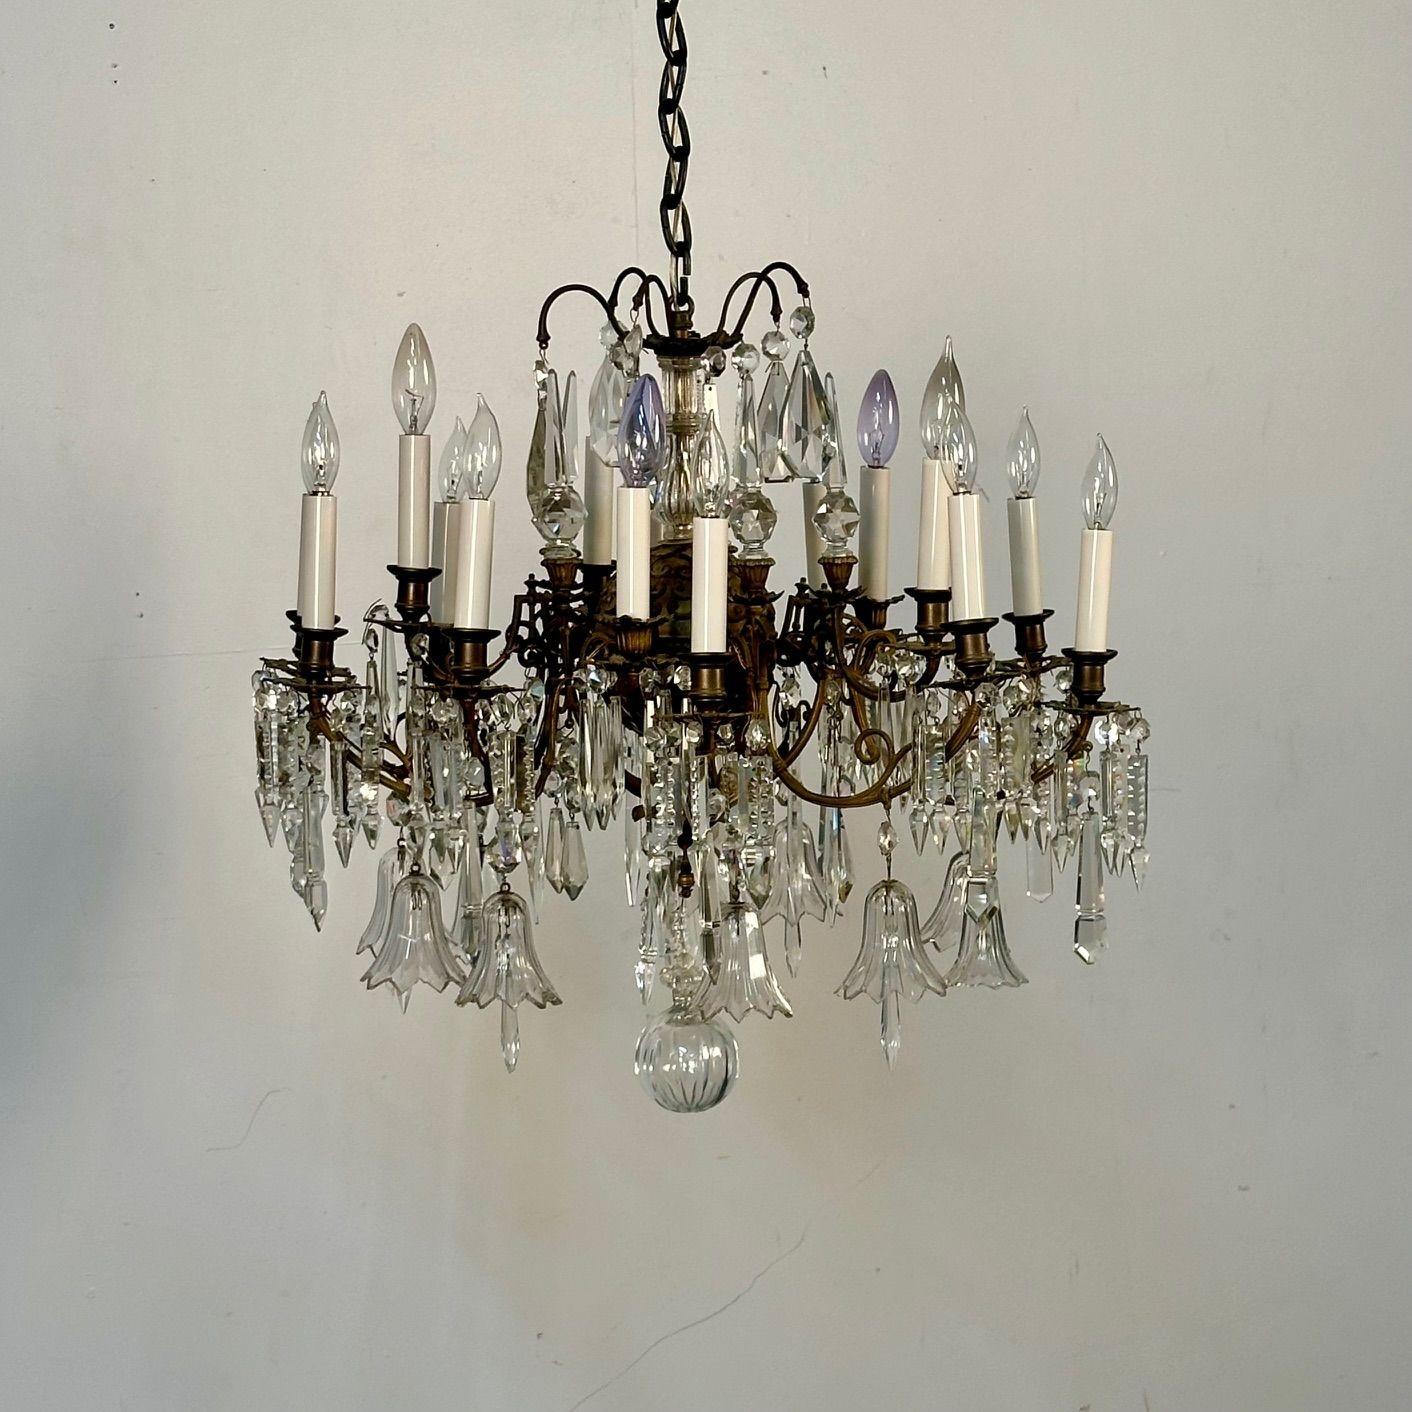 19th Century Victorian Chandelier, Bronze and Crystal,

A solid bronze and crystal Victorian era chandelier having a center circular bronze sphere supporting bronze arms and fine antique crystal adornments. Matching chain and canopy.

26 diameter x